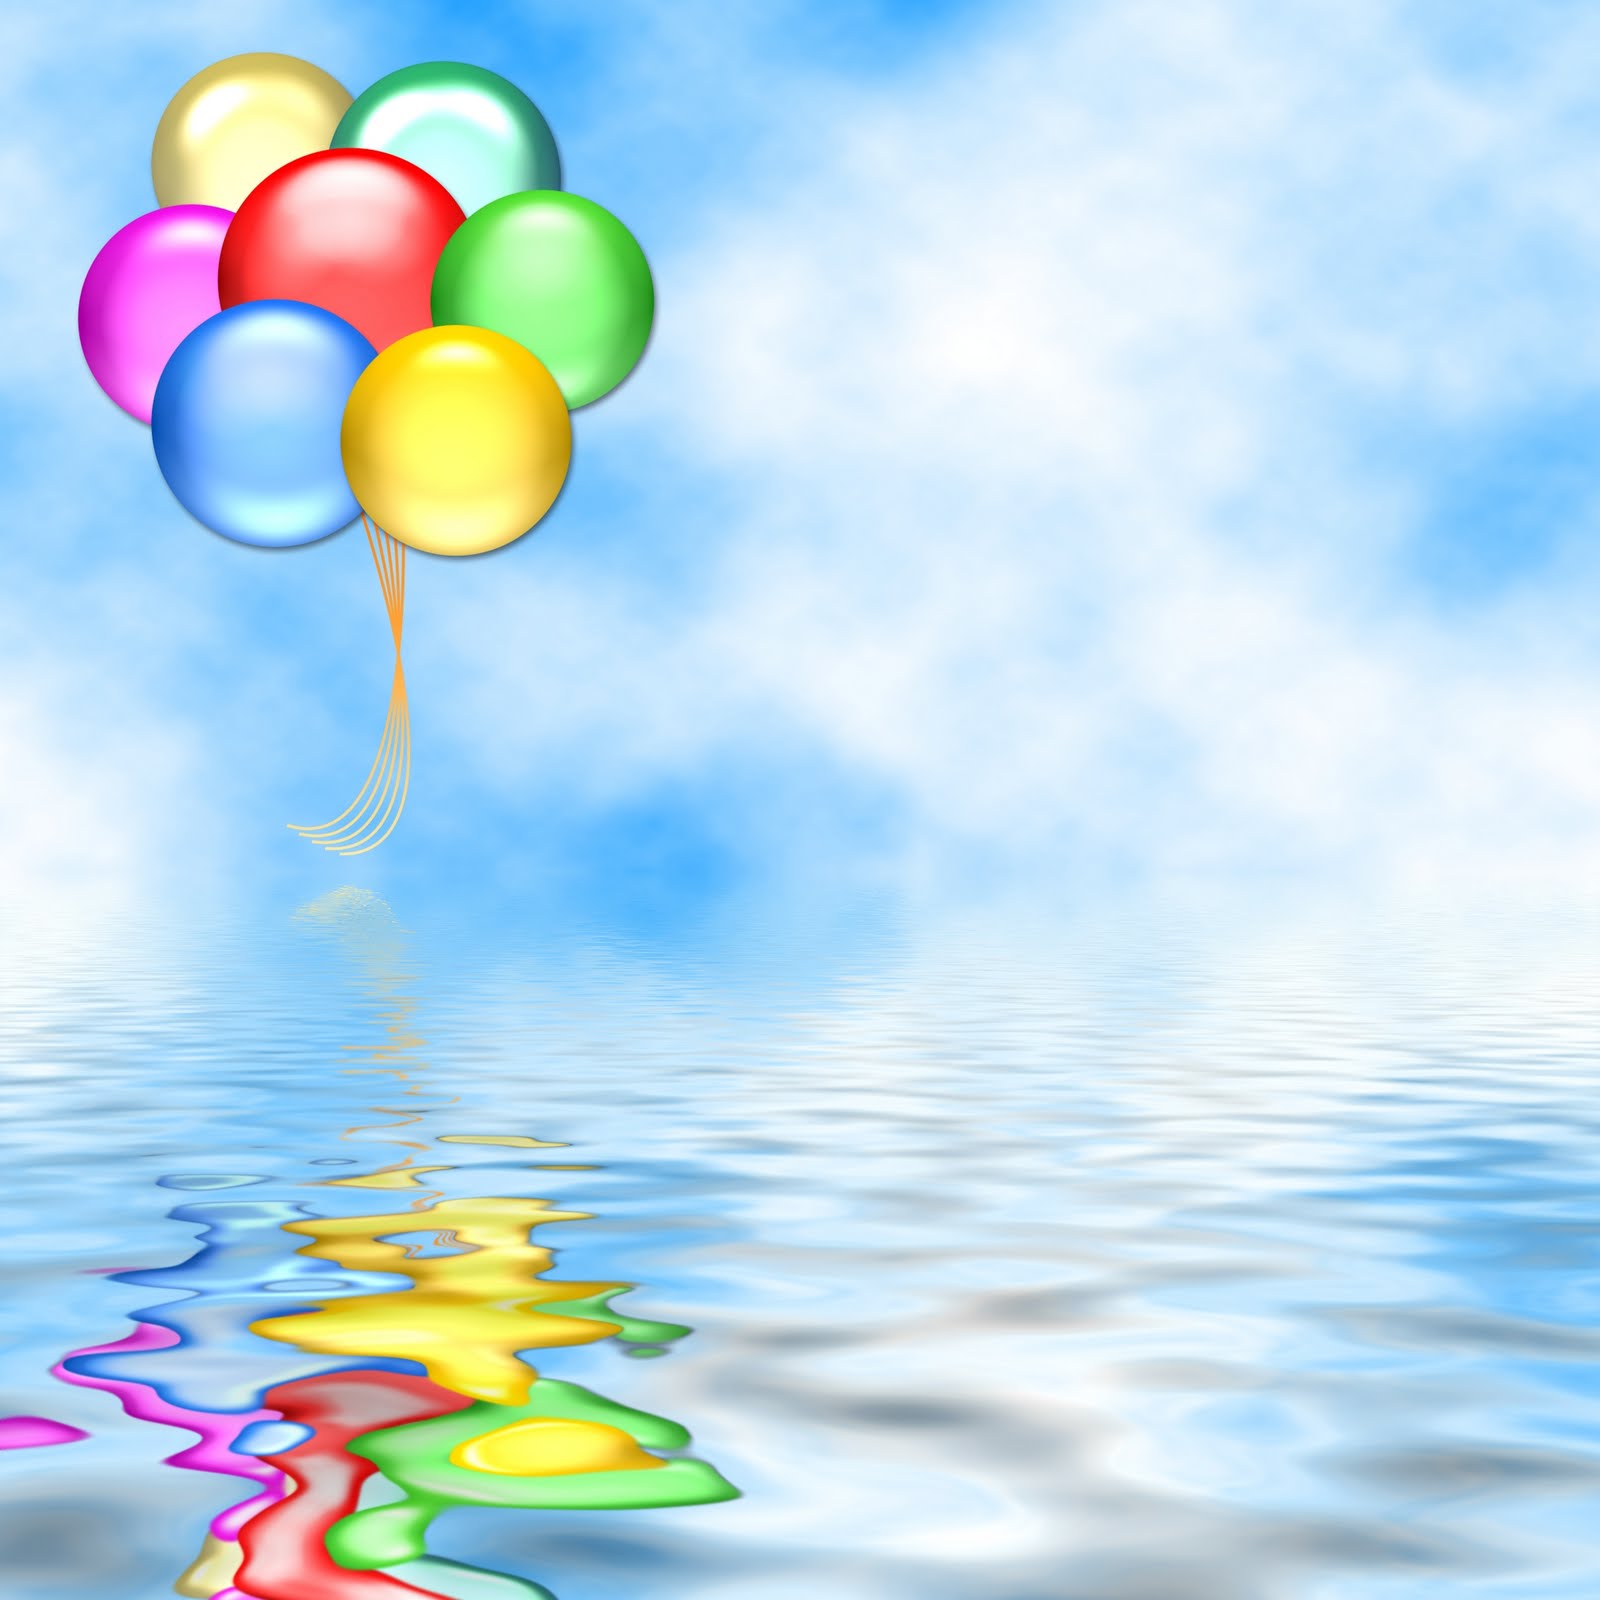 birthday balloon backgrounds tops wallpapers gallery